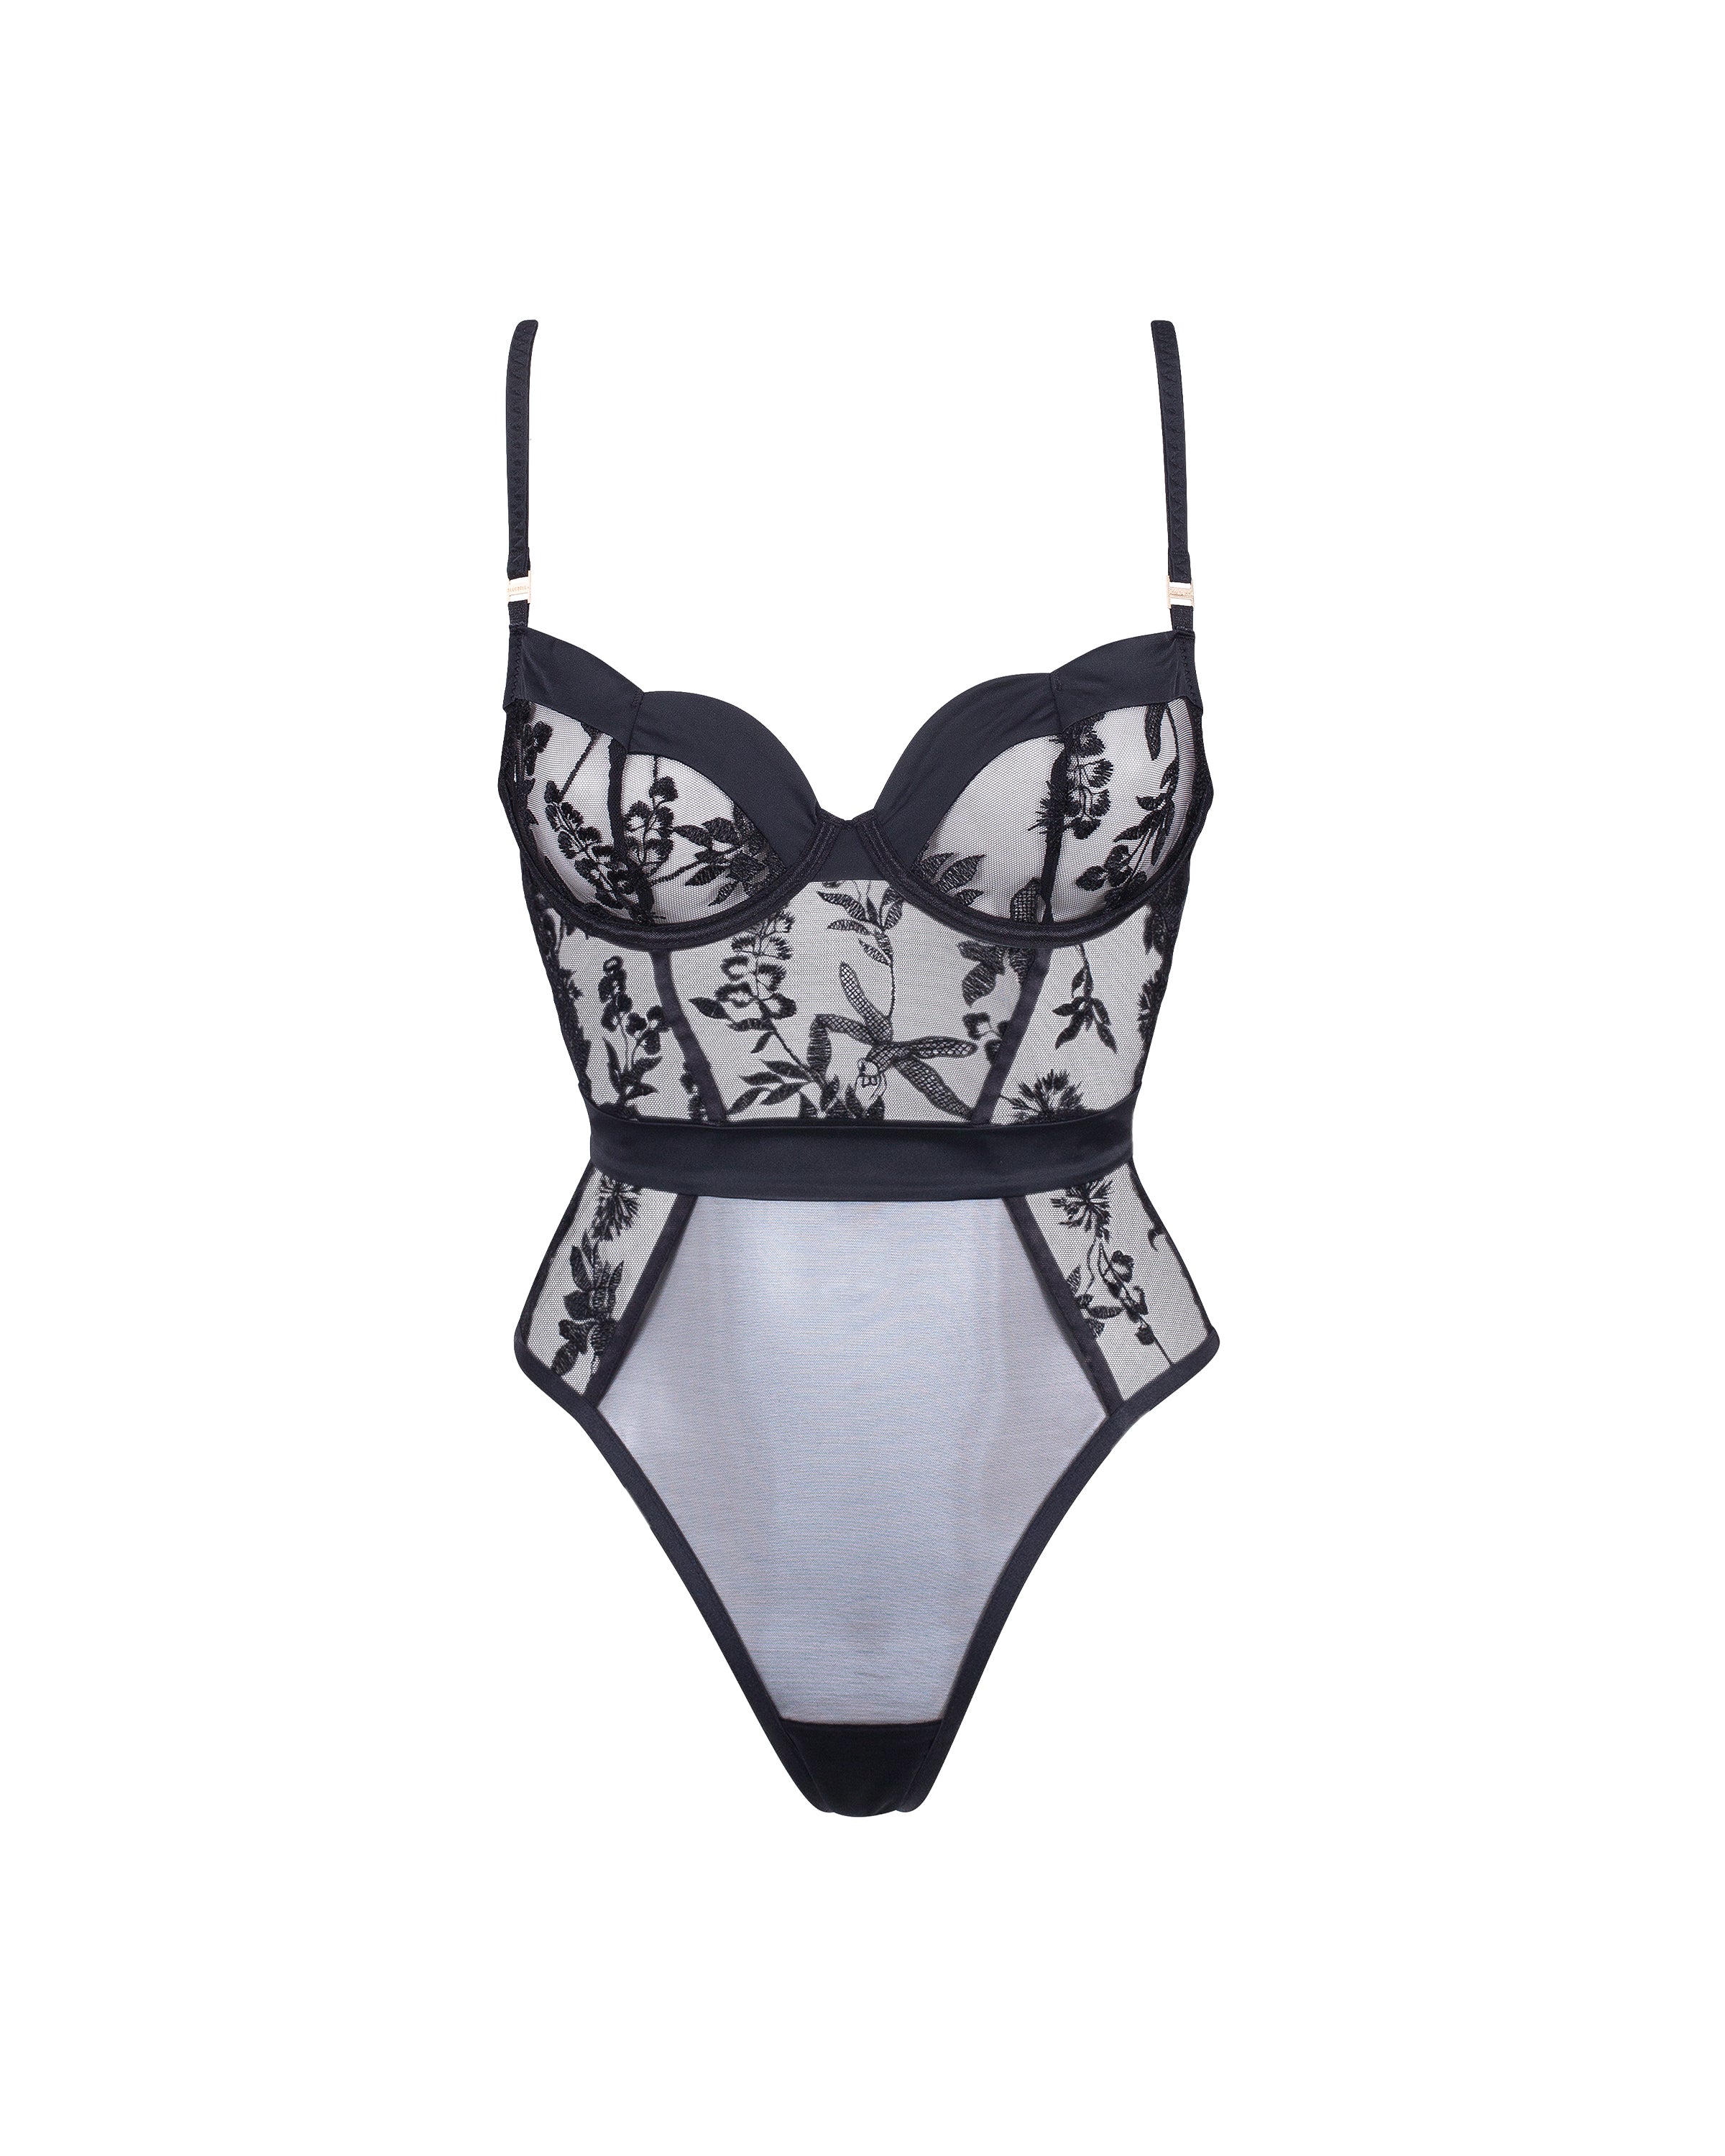 VIPA, Latvia Fashionable Chicago - buy lingerie at the best prices